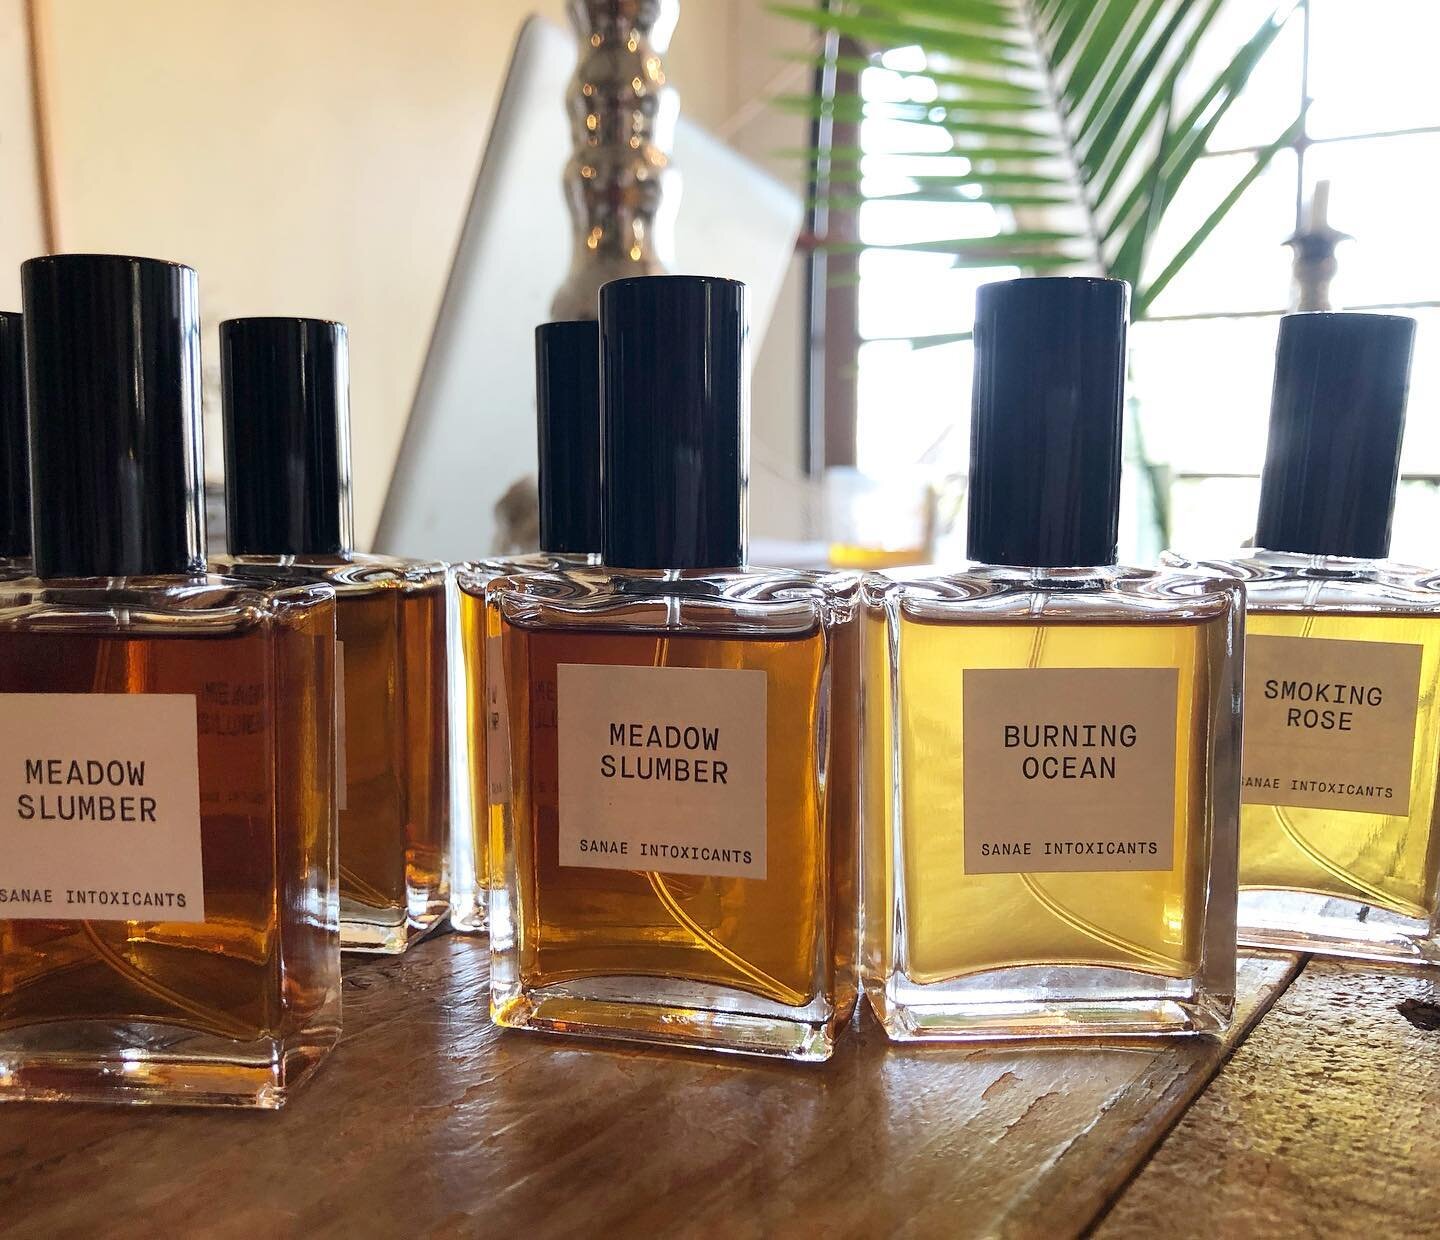 Have you tried layering our fragrances to create your own unique scent? 

Play around with different combinations and experiment how each mix smells and feels like! Our discovery sets or roll-ons are a great way to start combining ✨

Comment below on